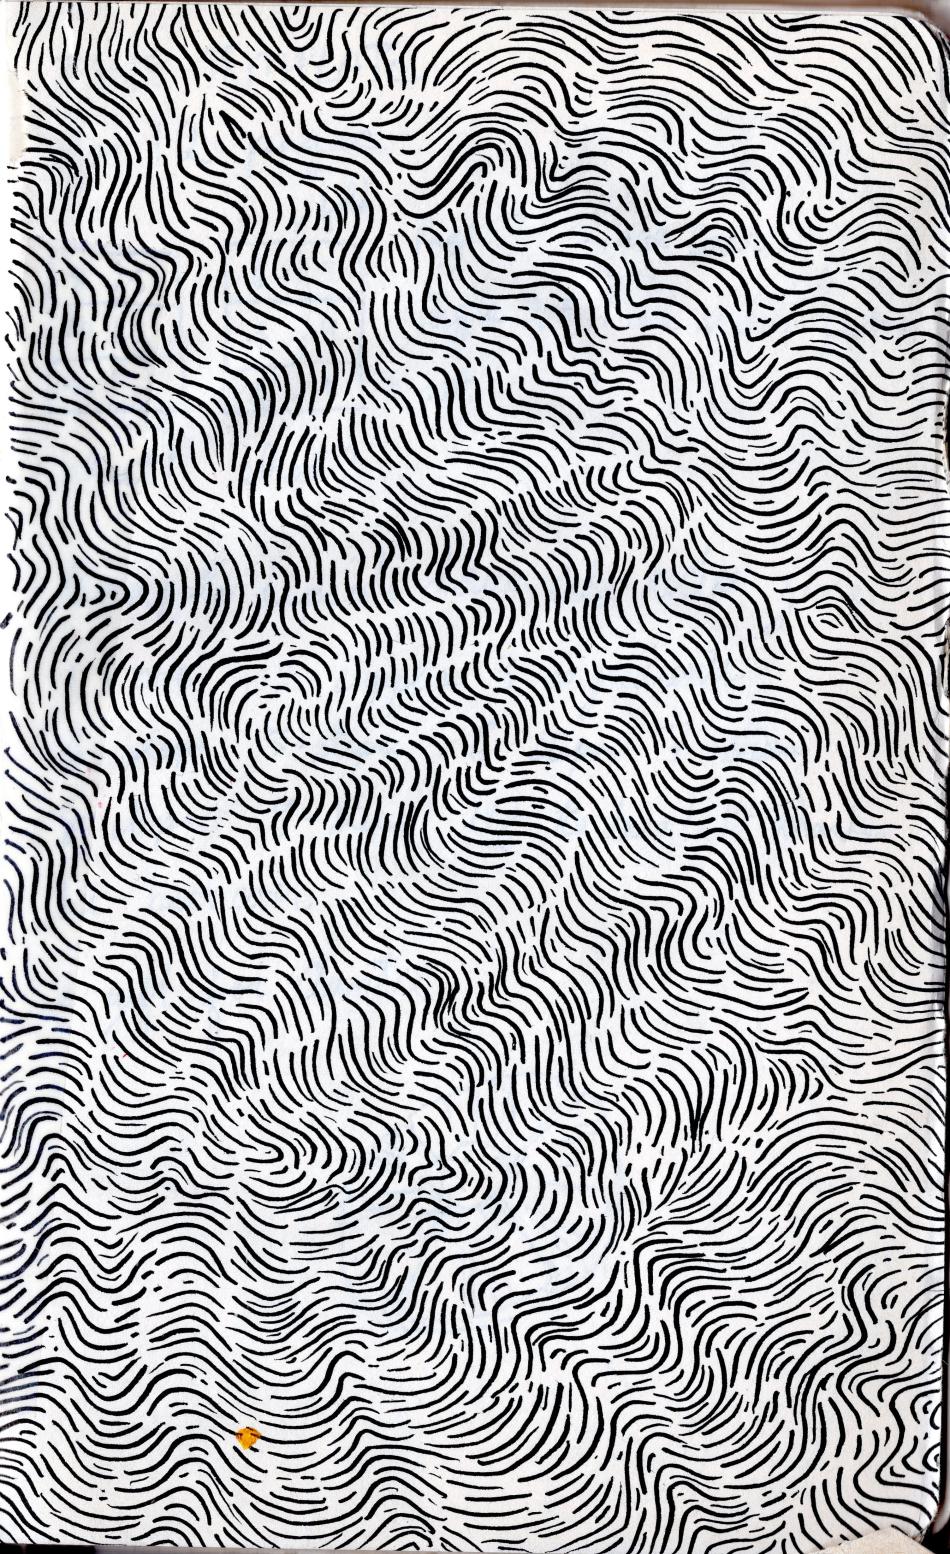 The image is an abstract illustration. The image is a collection of long, waving black lines on a simple white background. The lines are like waves of hair, which occupy the whole of the image.